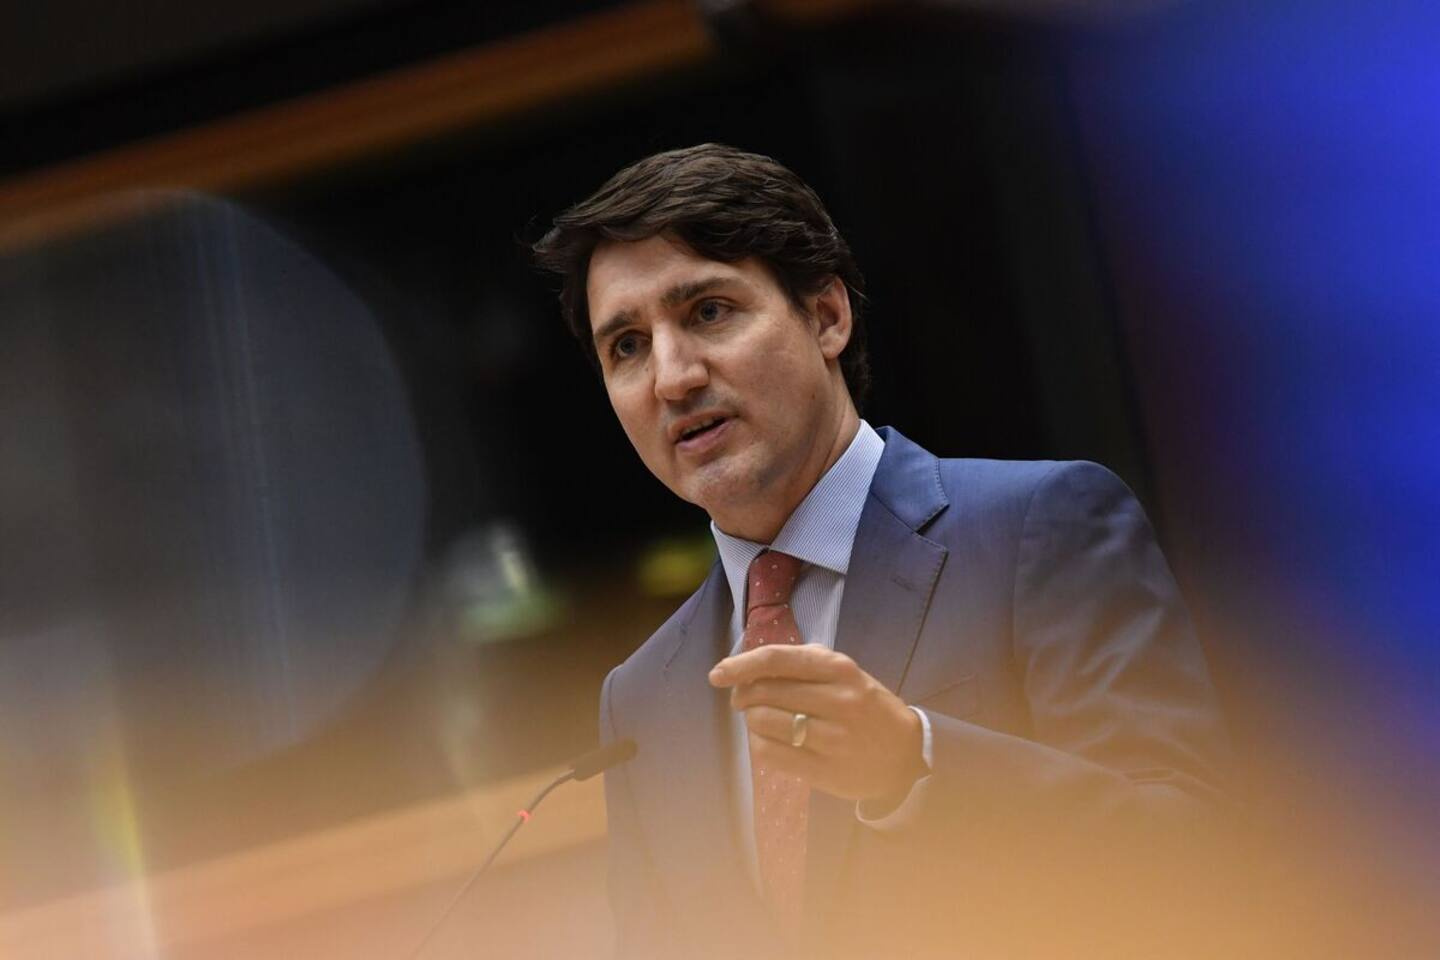 Border measures: “the pandemic is not over”, reminds Trudeau